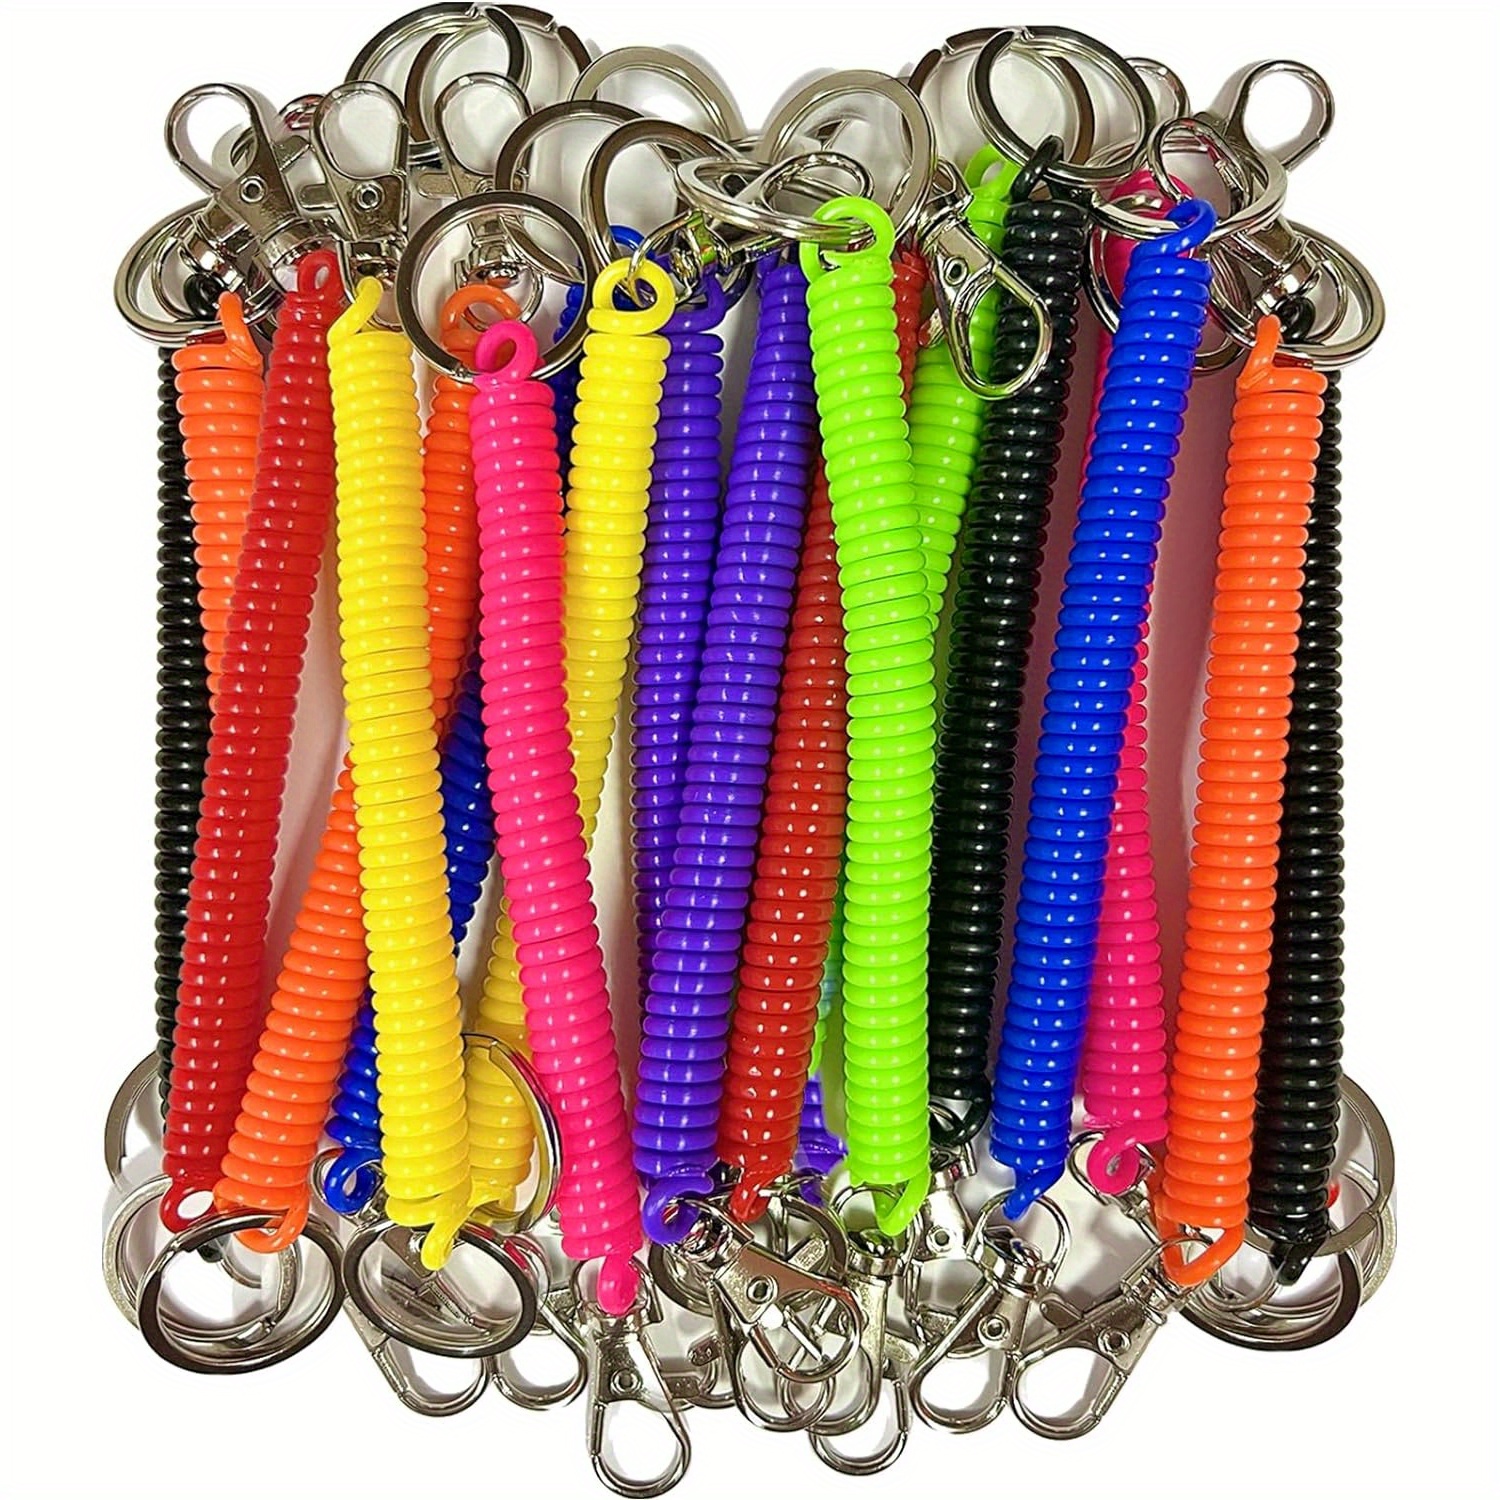 

16-piece Retractable Coil Keychains - Theftproof, Anti-lost Stretch Cord With Rings & Bracelet For Keys, Wallets, Cellphones - 8 Vibrant Colors